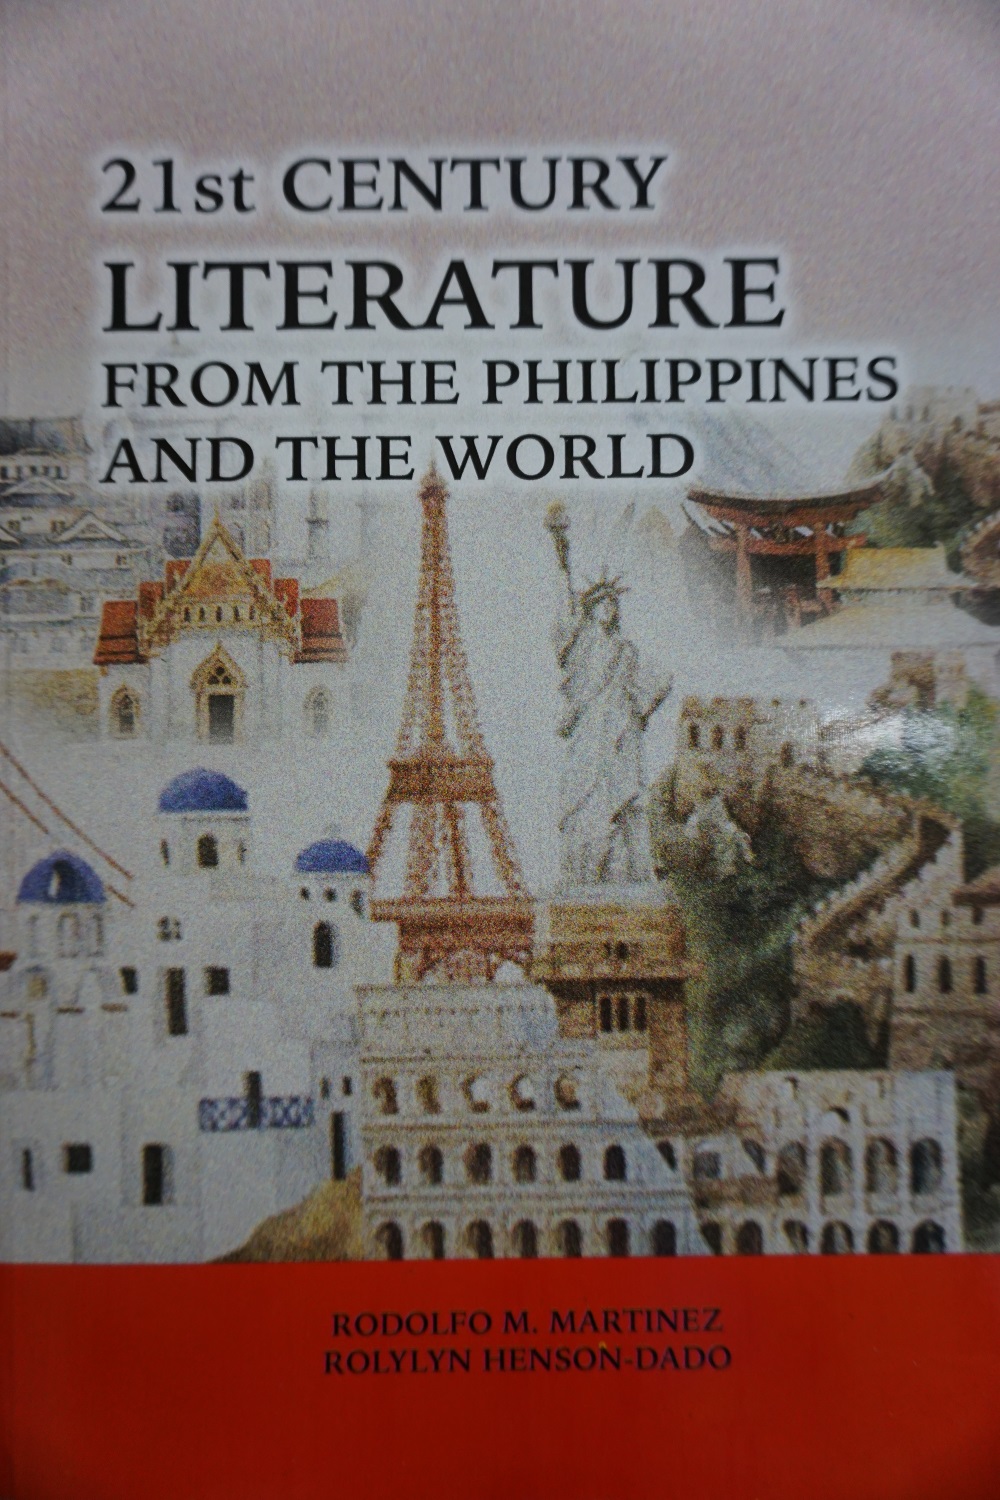 pdfcoffee .com_21st-century-literature-from-the-philippines-to-the-world-pdf-.pdf